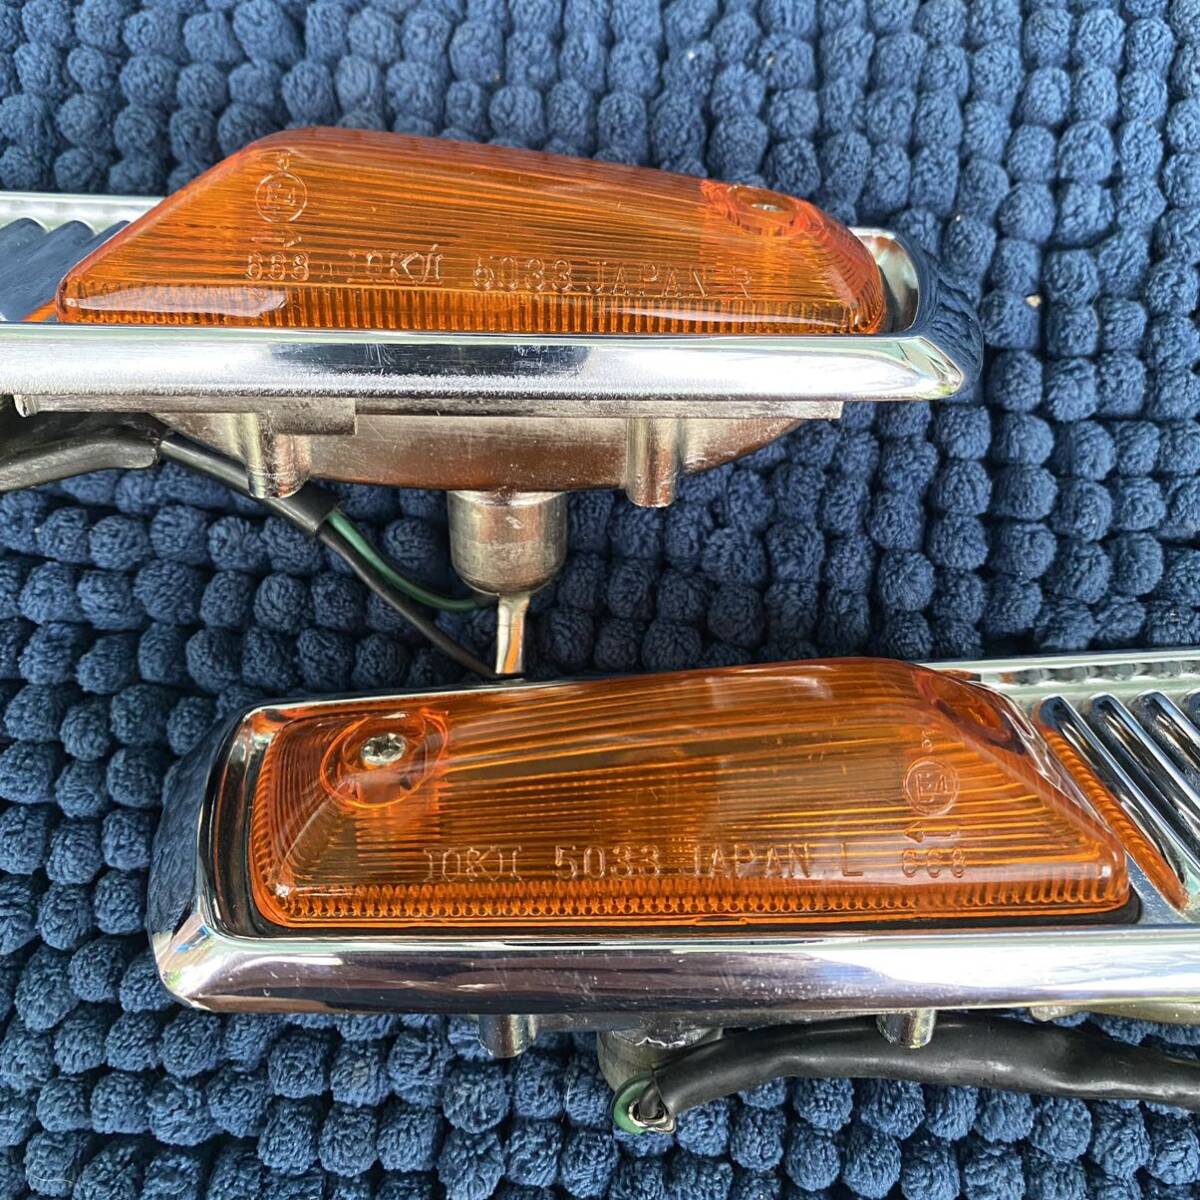  rare Nissan original part IKI Nissan Cedric Gloria 330 331 side turn signal side marker that time thing deco truck old car 